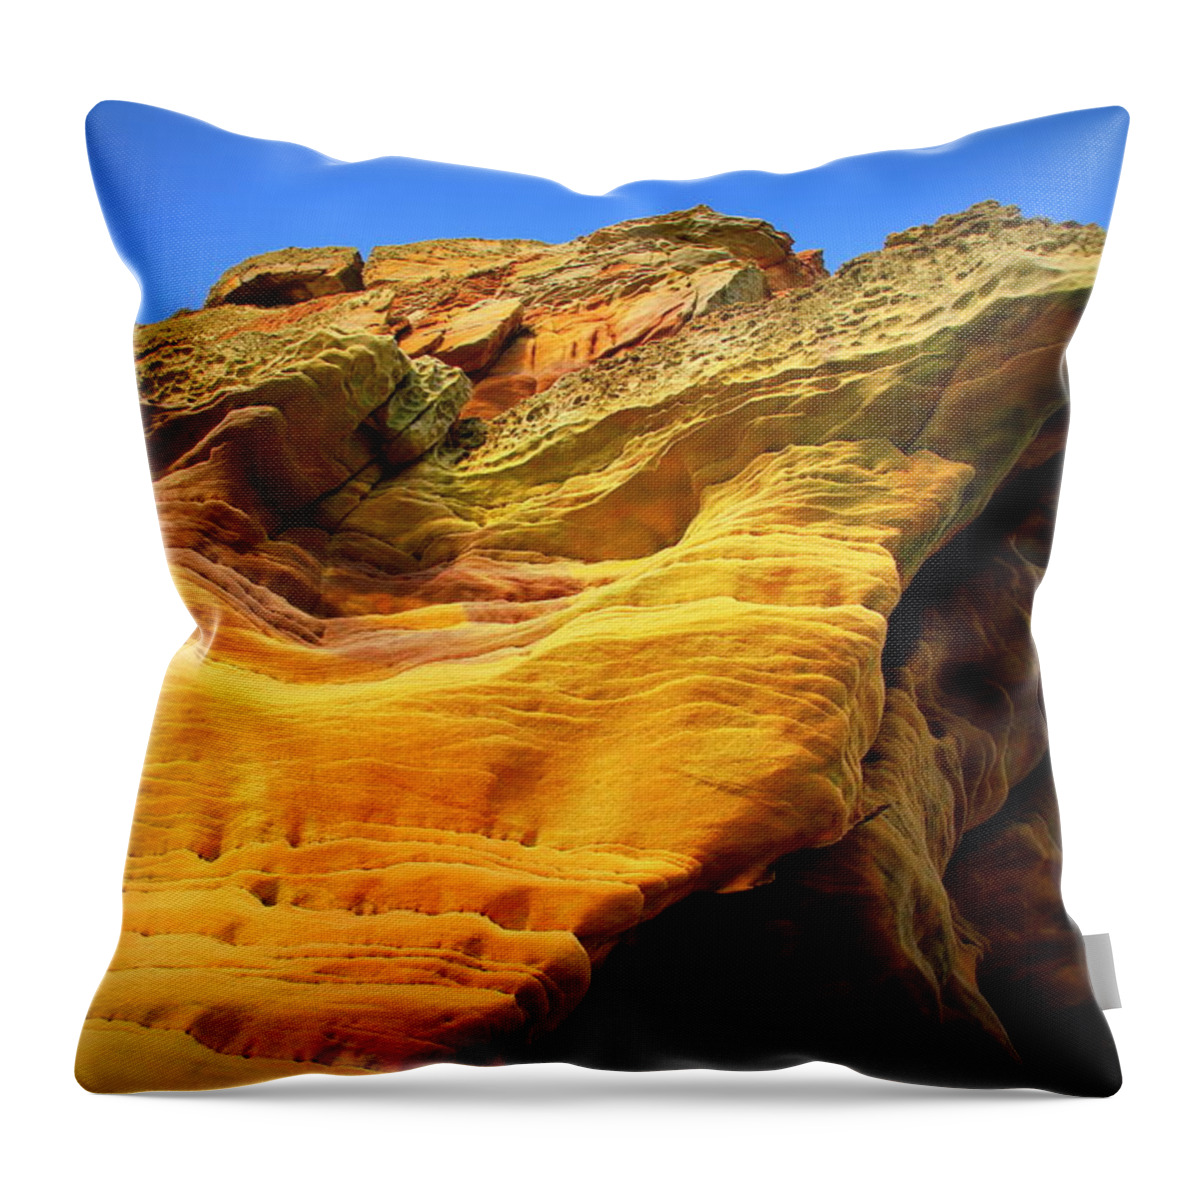 The Caves Throw Pillow featuring the photograph The Caves Too - Scotland by Gene Taylor